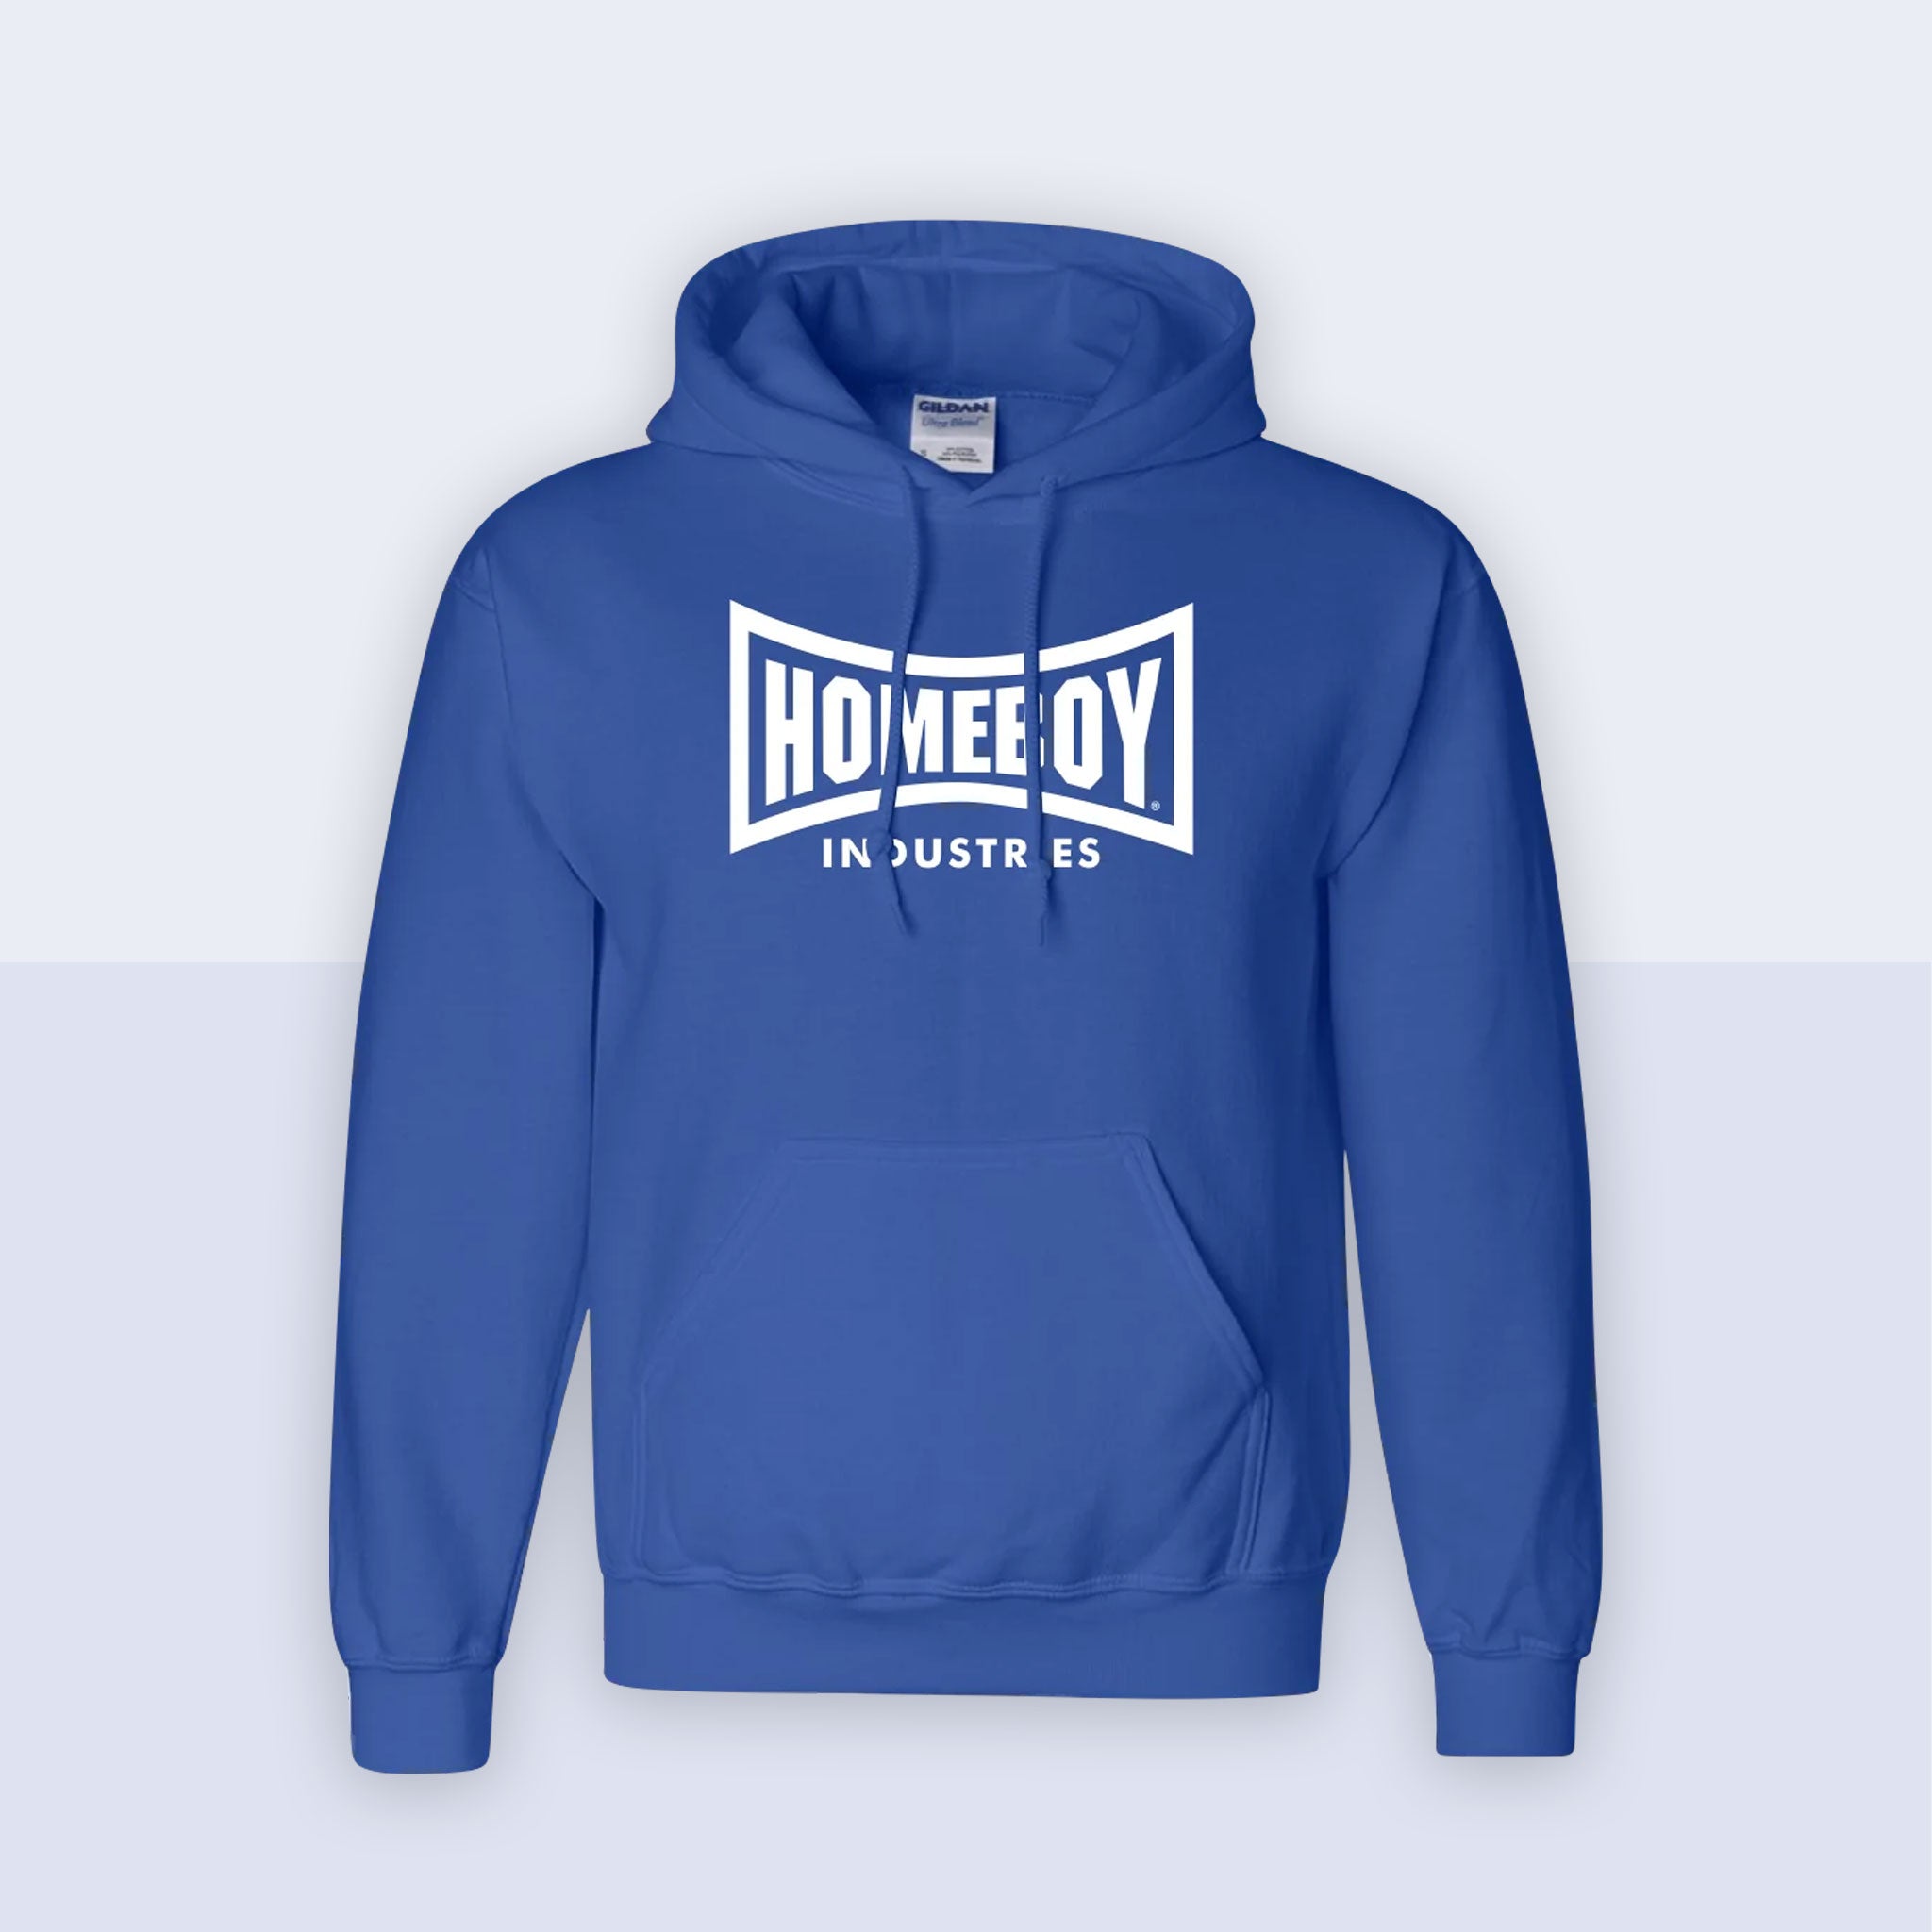 You-Are-Exactly_-Hoodie_blue1.jpg